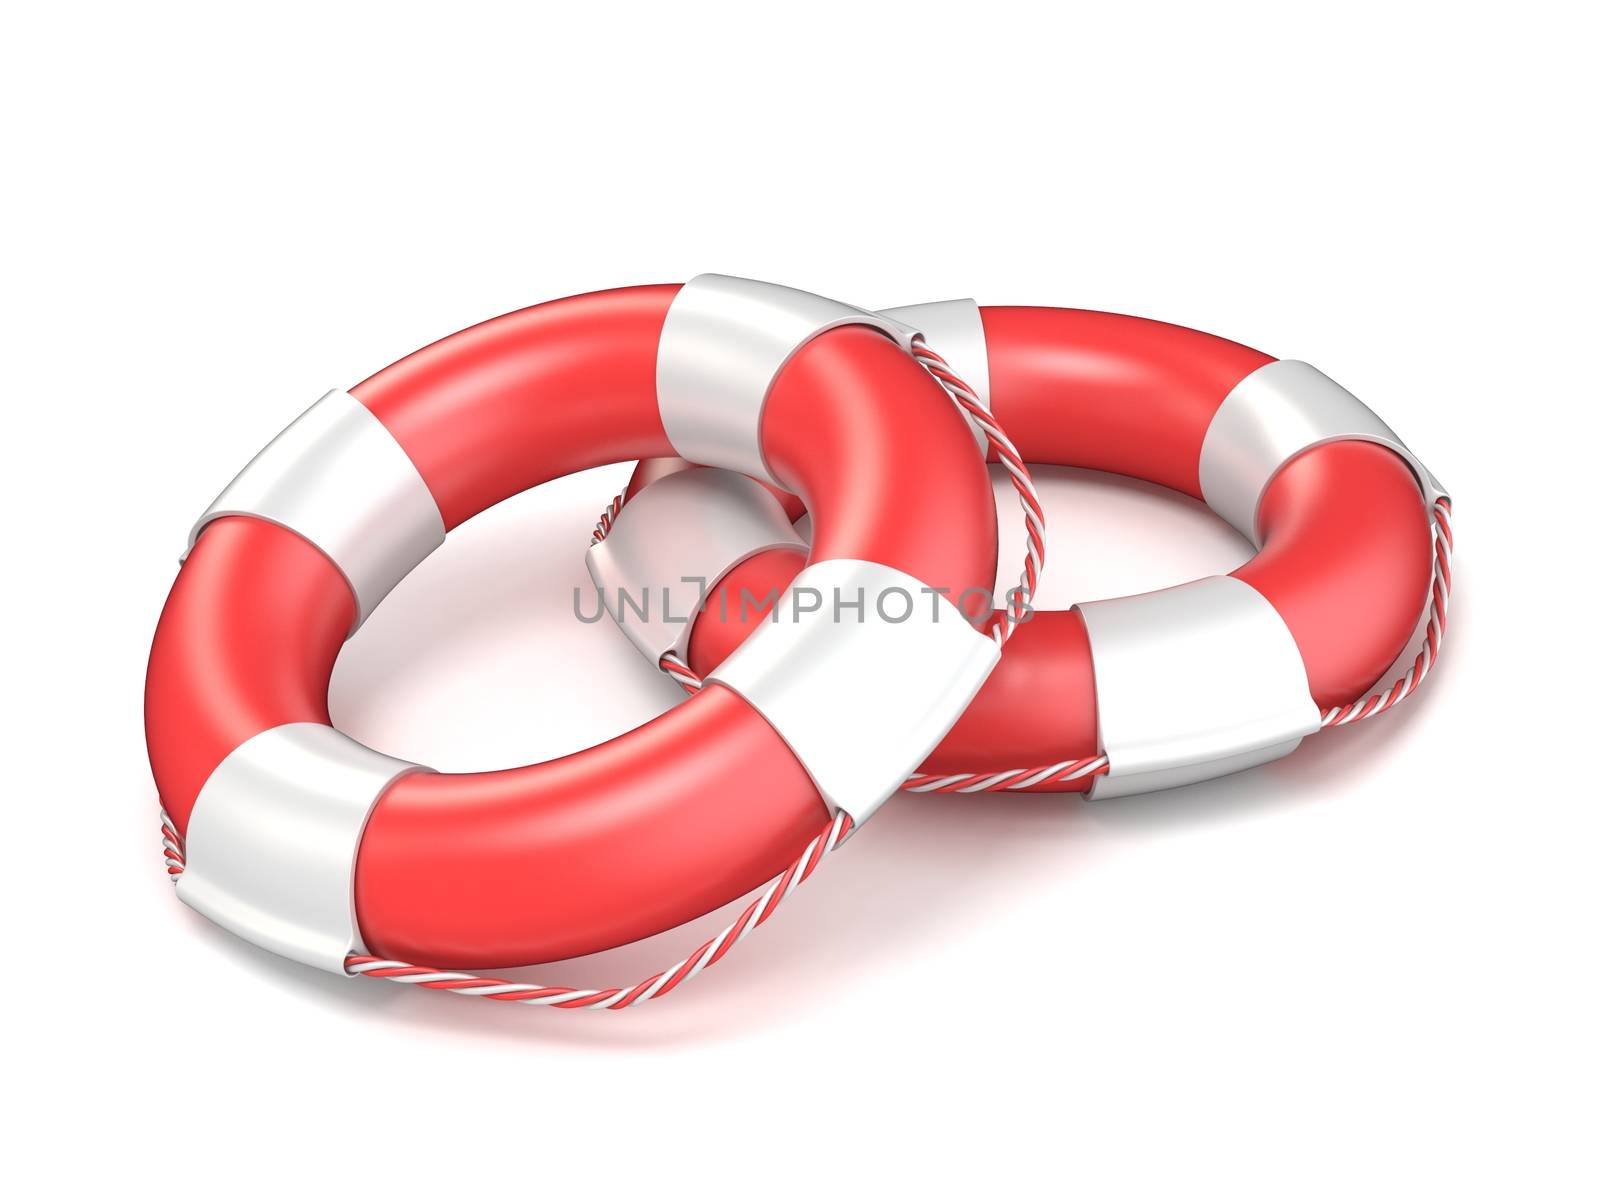 Two red life buoys 3D render illustration isolated on white background